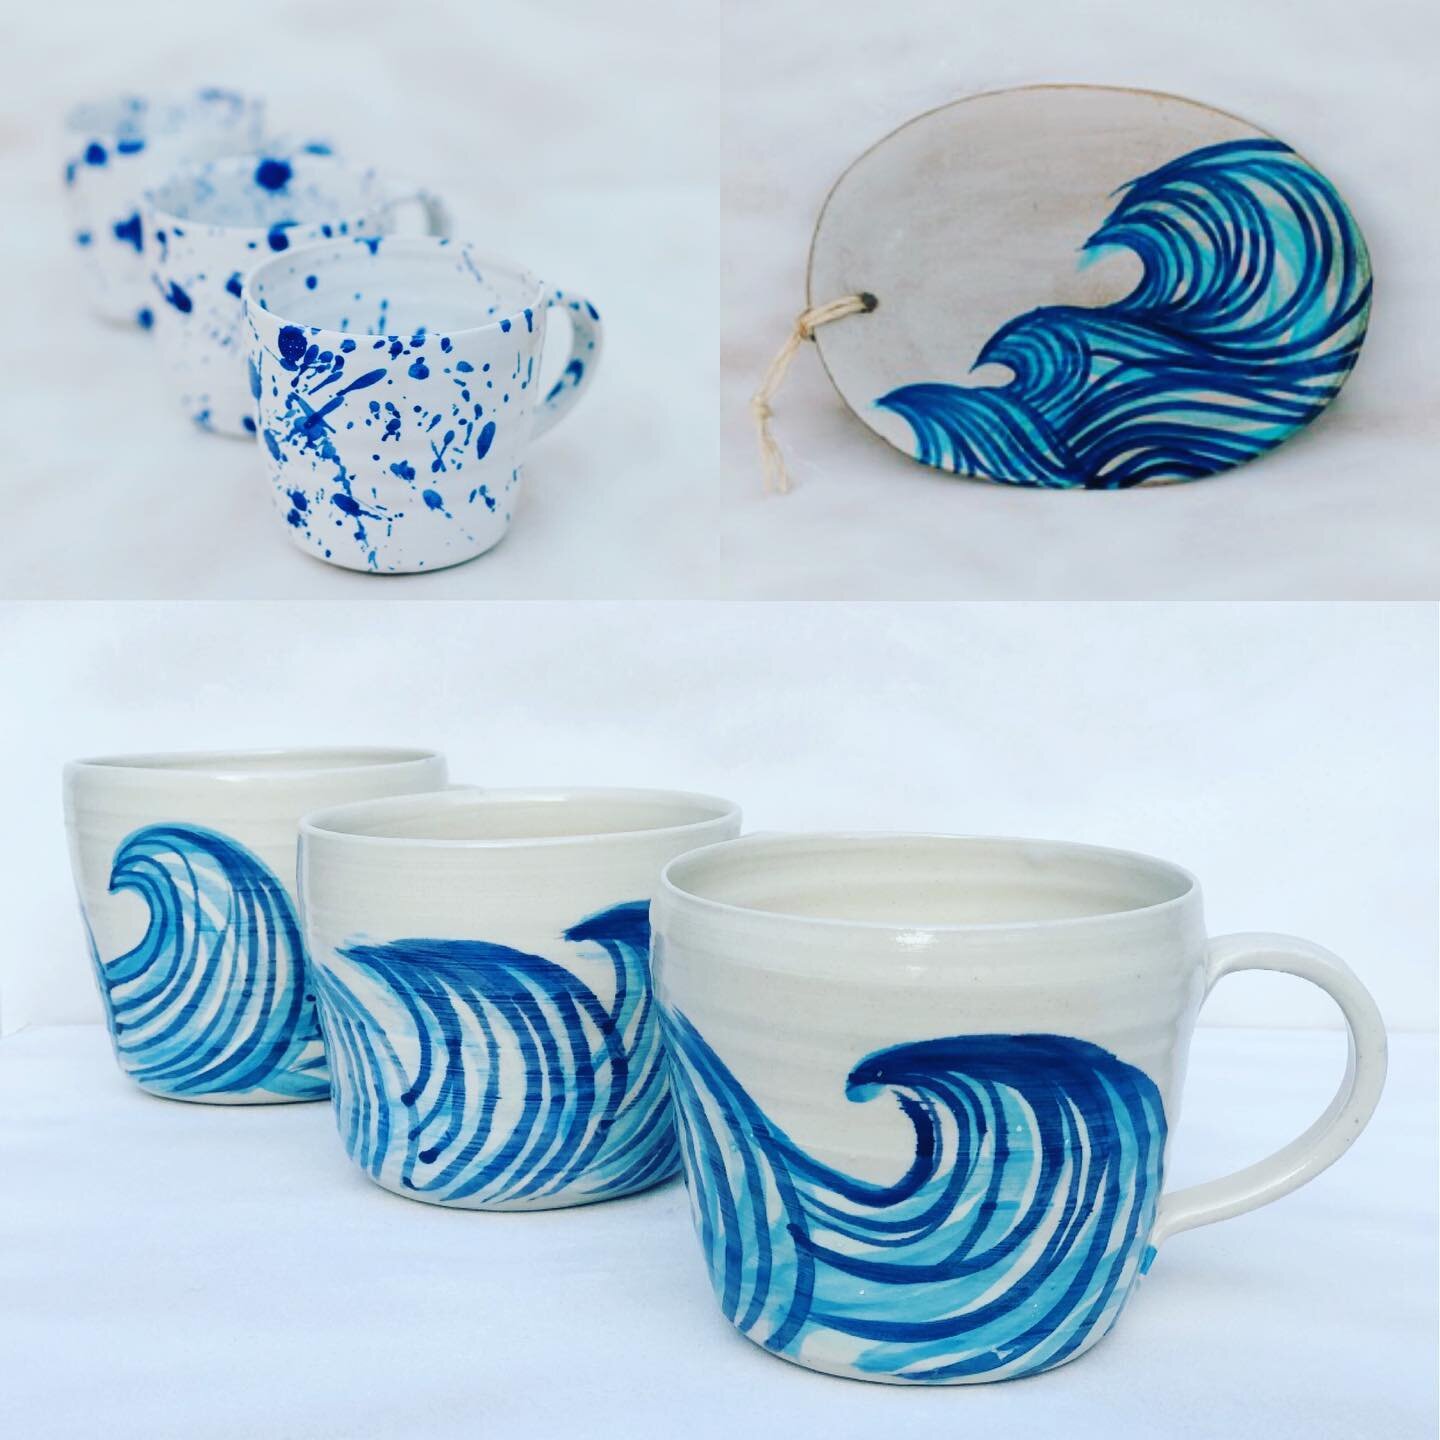 🌊🌊🌊Wave and Splash mugs new Batch.. 🤍💚💙🤍💚💙🌊🌊🌊 now available direct from this page ! Just tap in product to view on my website 🤓#ceramicmug #lovemymug#loveceramic#splashmug#wavemug#loveceramic#tableware#artisan#pottery#clay#handmade#potte